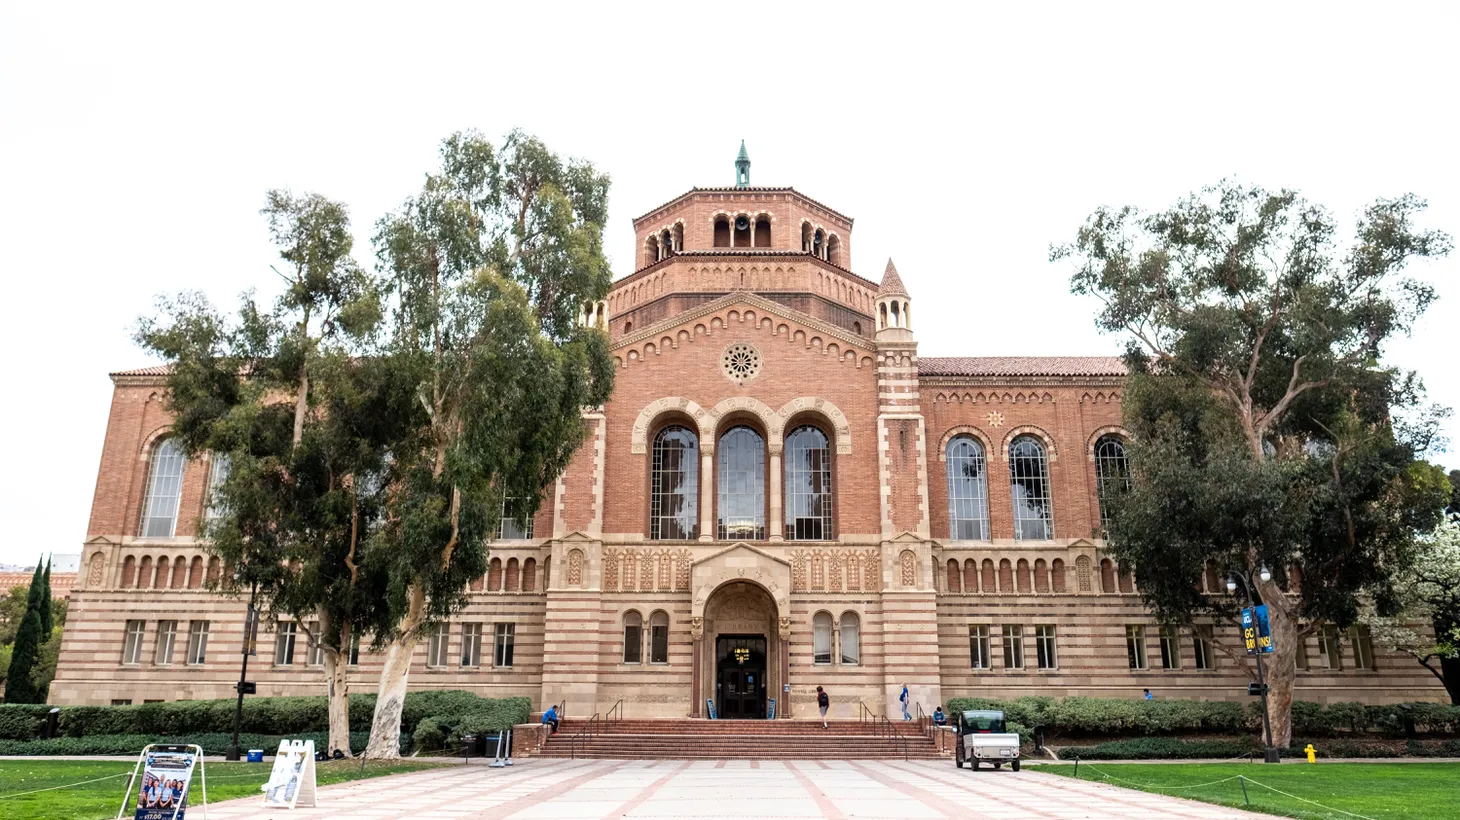 Powell Library sits on the campus of UCLA in Westwood, CA. “The very high-end schools … will continue to be very difficult to get into. … The demand for them is not going to decline anytime soon,” says Doug Belkin, higher education reporter for the Wall Street Journal.